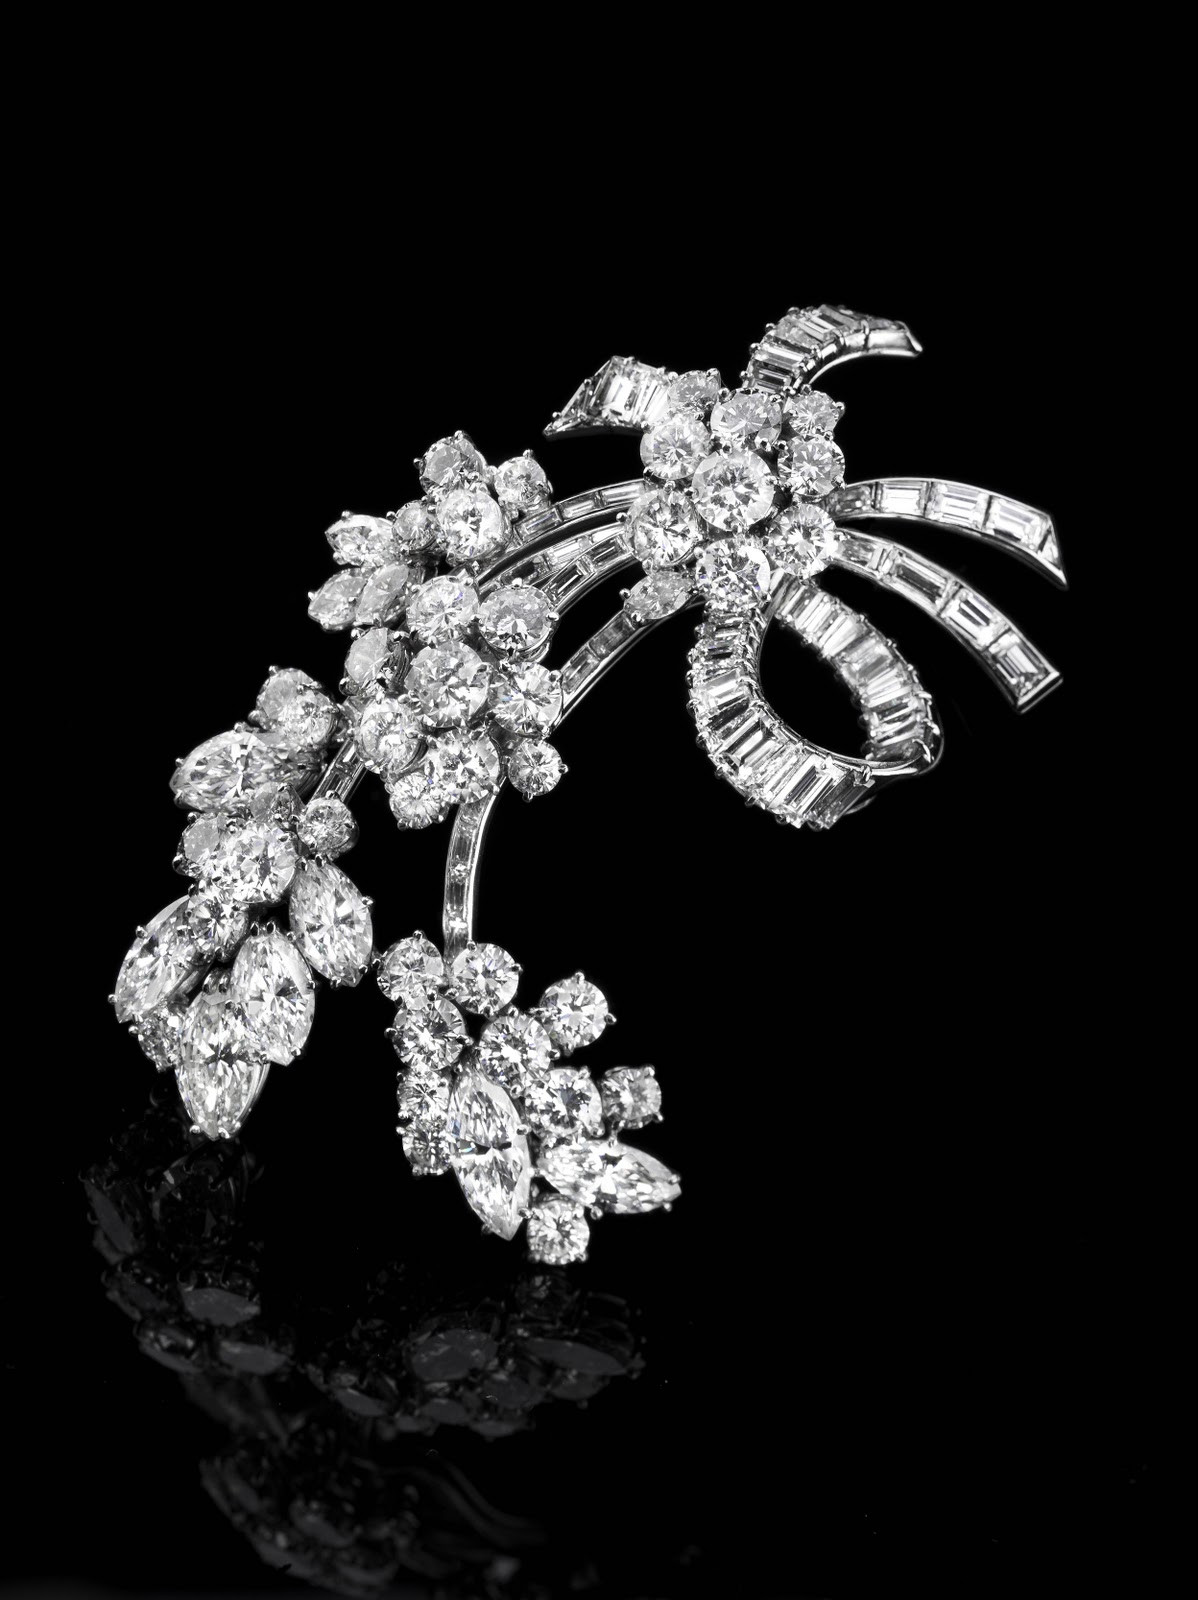 Diamond Brooches
 Jewelry News Network 24 Ct Graff Diamond Ring Could